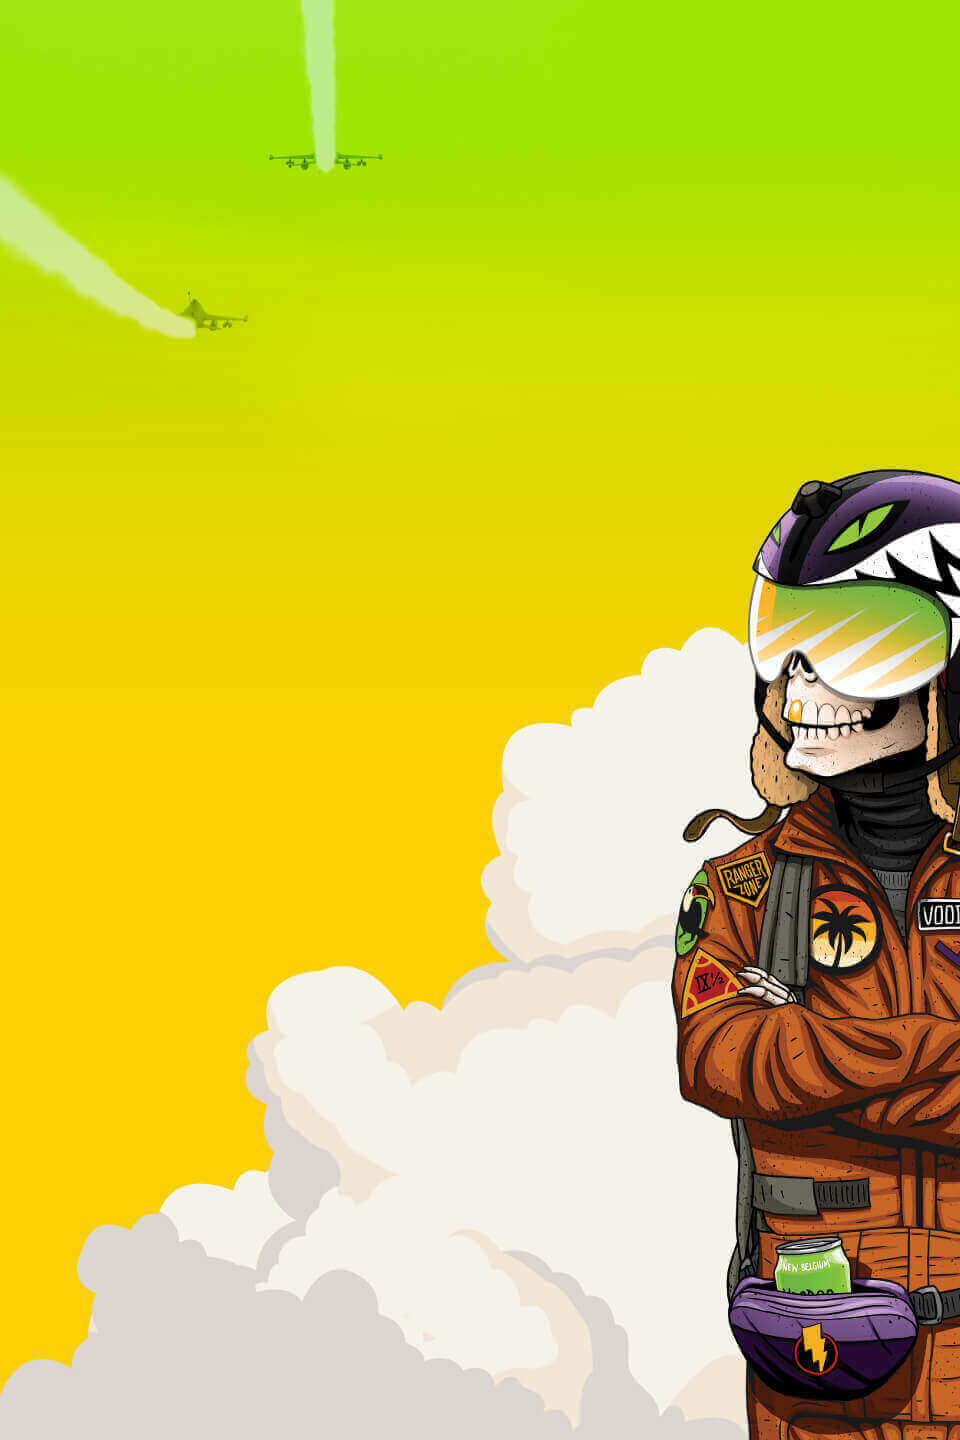 Voodoo Ranger tropic force character on top of a bright yellow and green background with clouds and four airplanes flying above